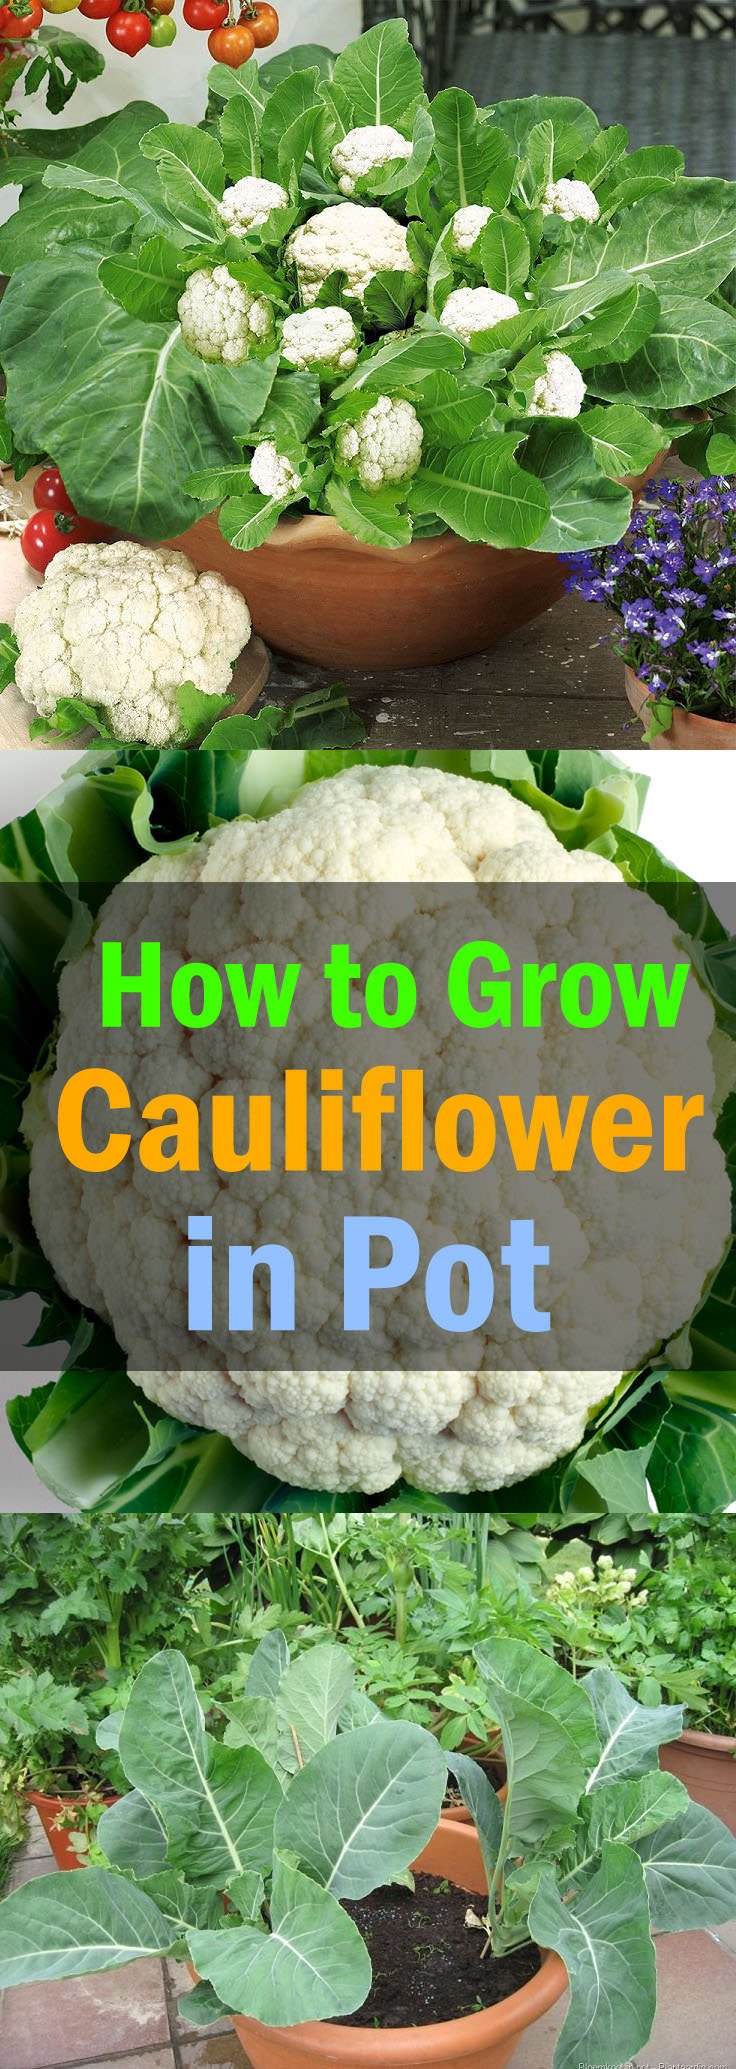 Learn how to grow cauliflower in containers in this article. Growing cauliflowers in containers is not very difficult if you know its proper requirements and ideal growing conditions.